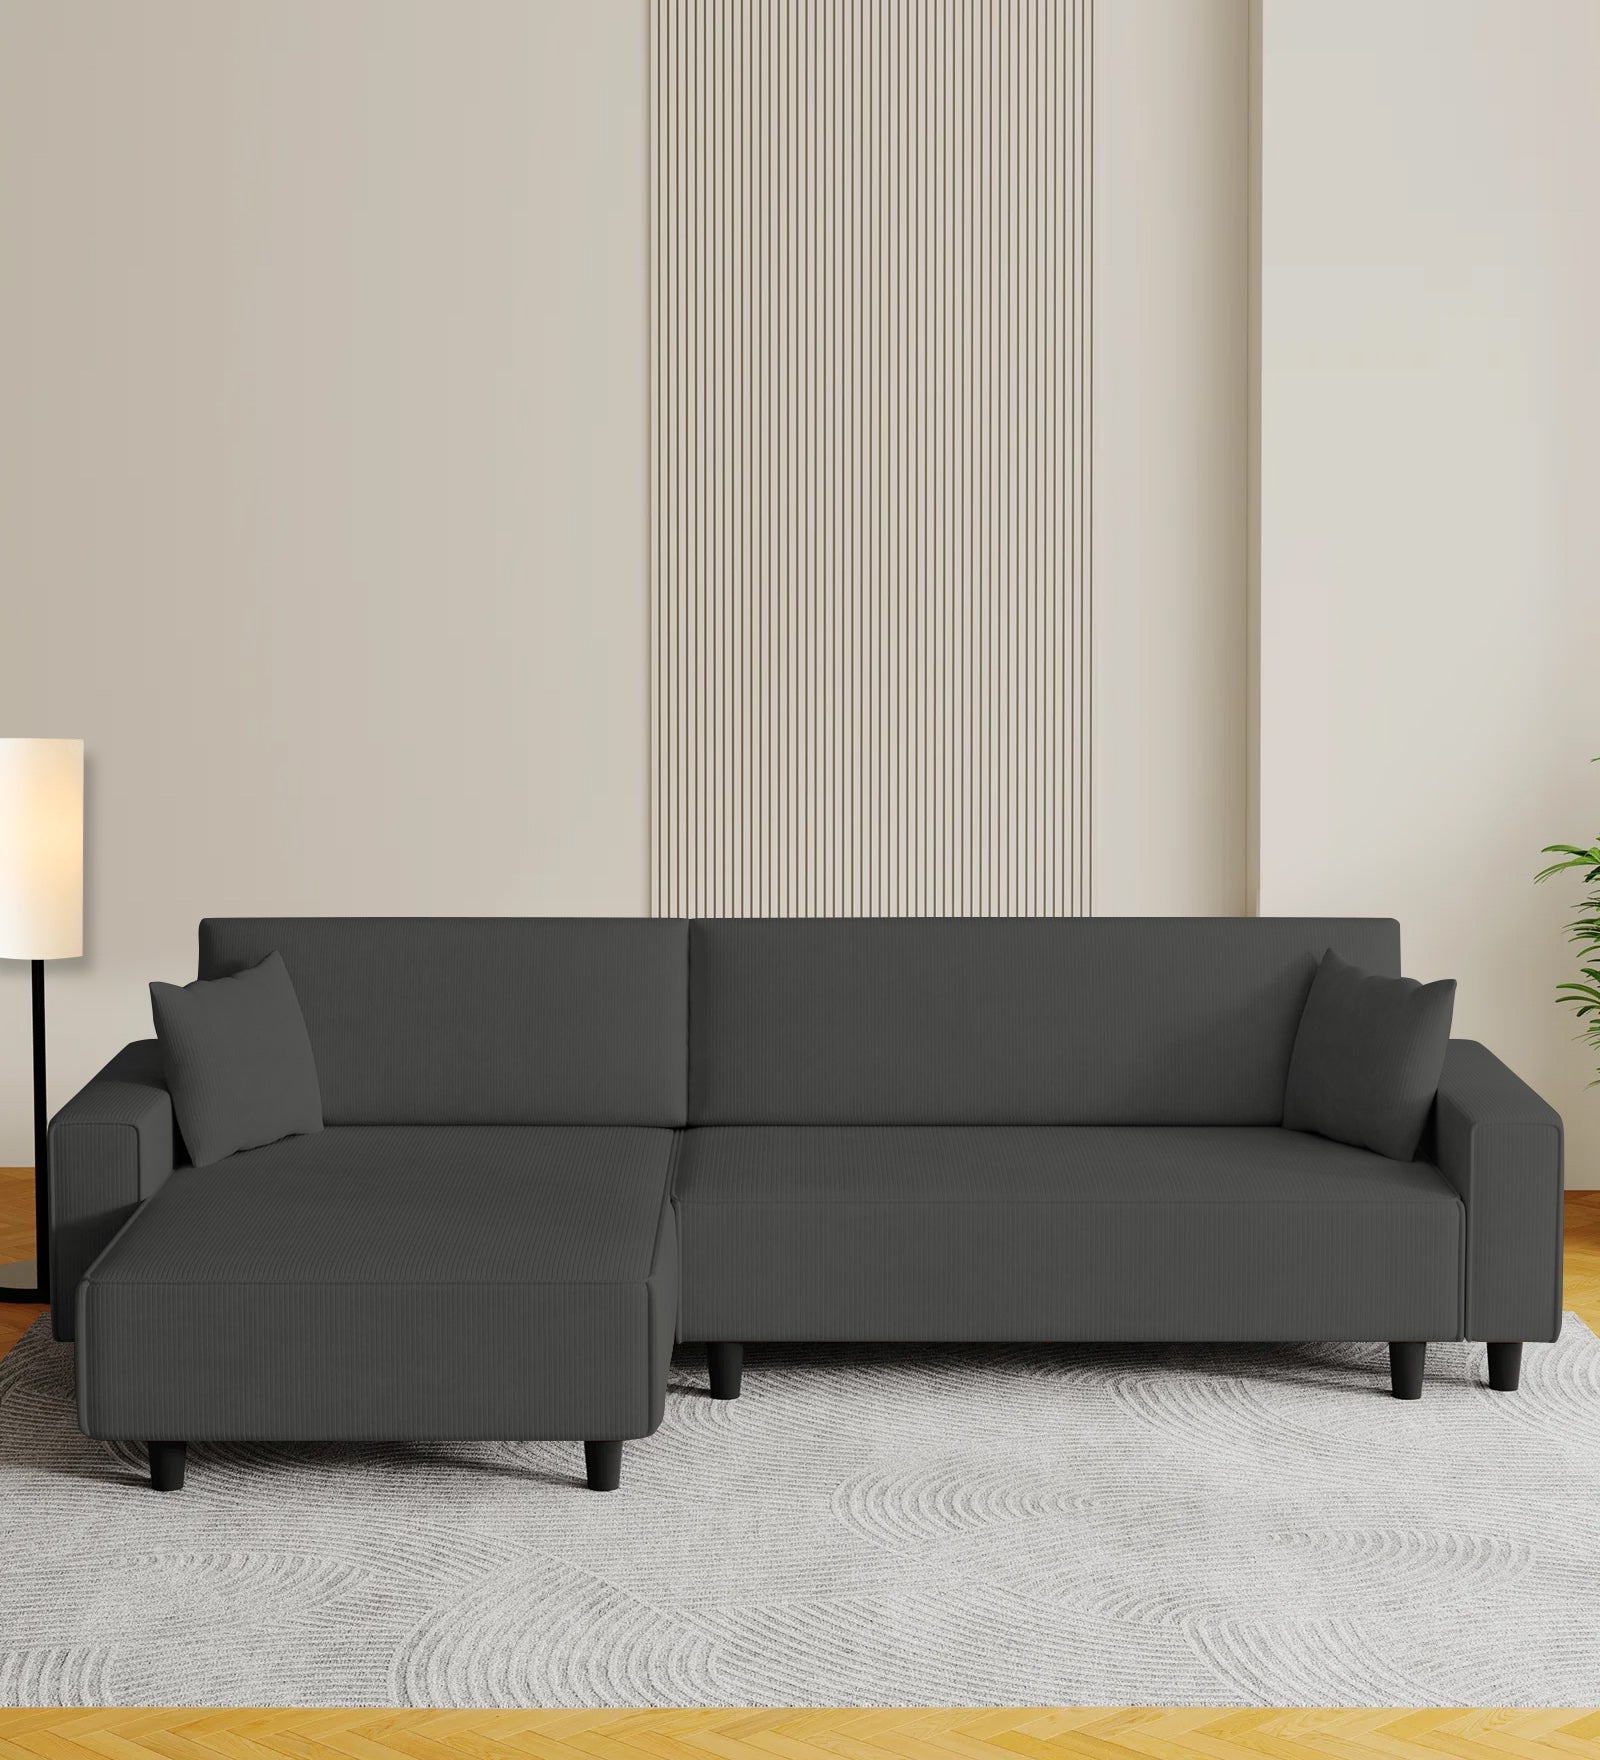 Peach Fabric RHS 6 Seater Sectional Sofa Cum Bed With Storage In Charcoal Grey Colour